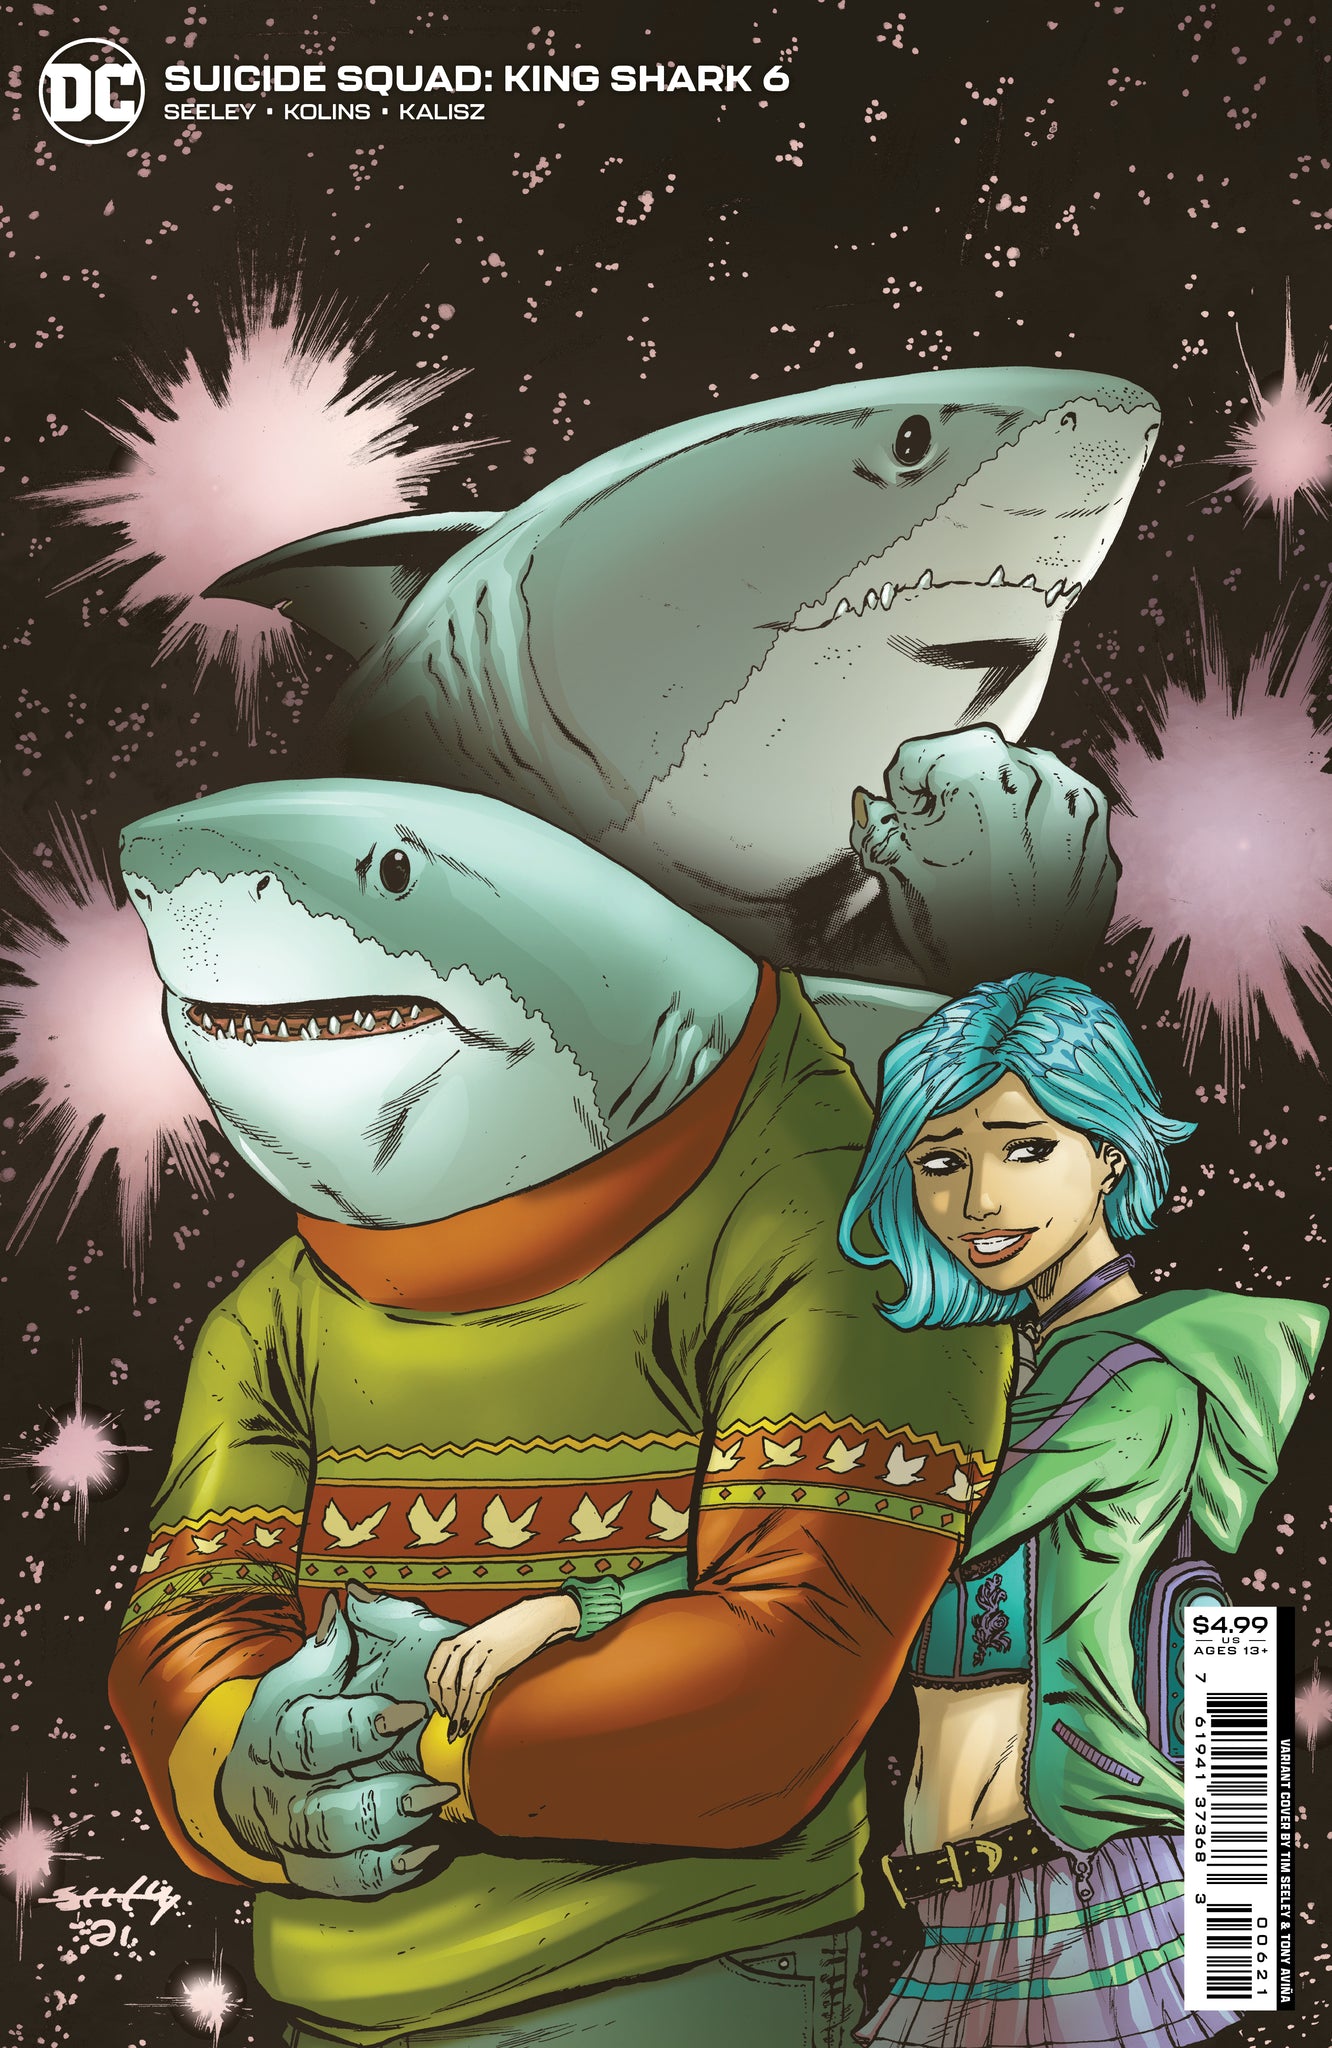 SUICIDE SQUAD KING SHARK #6 (OF 6)